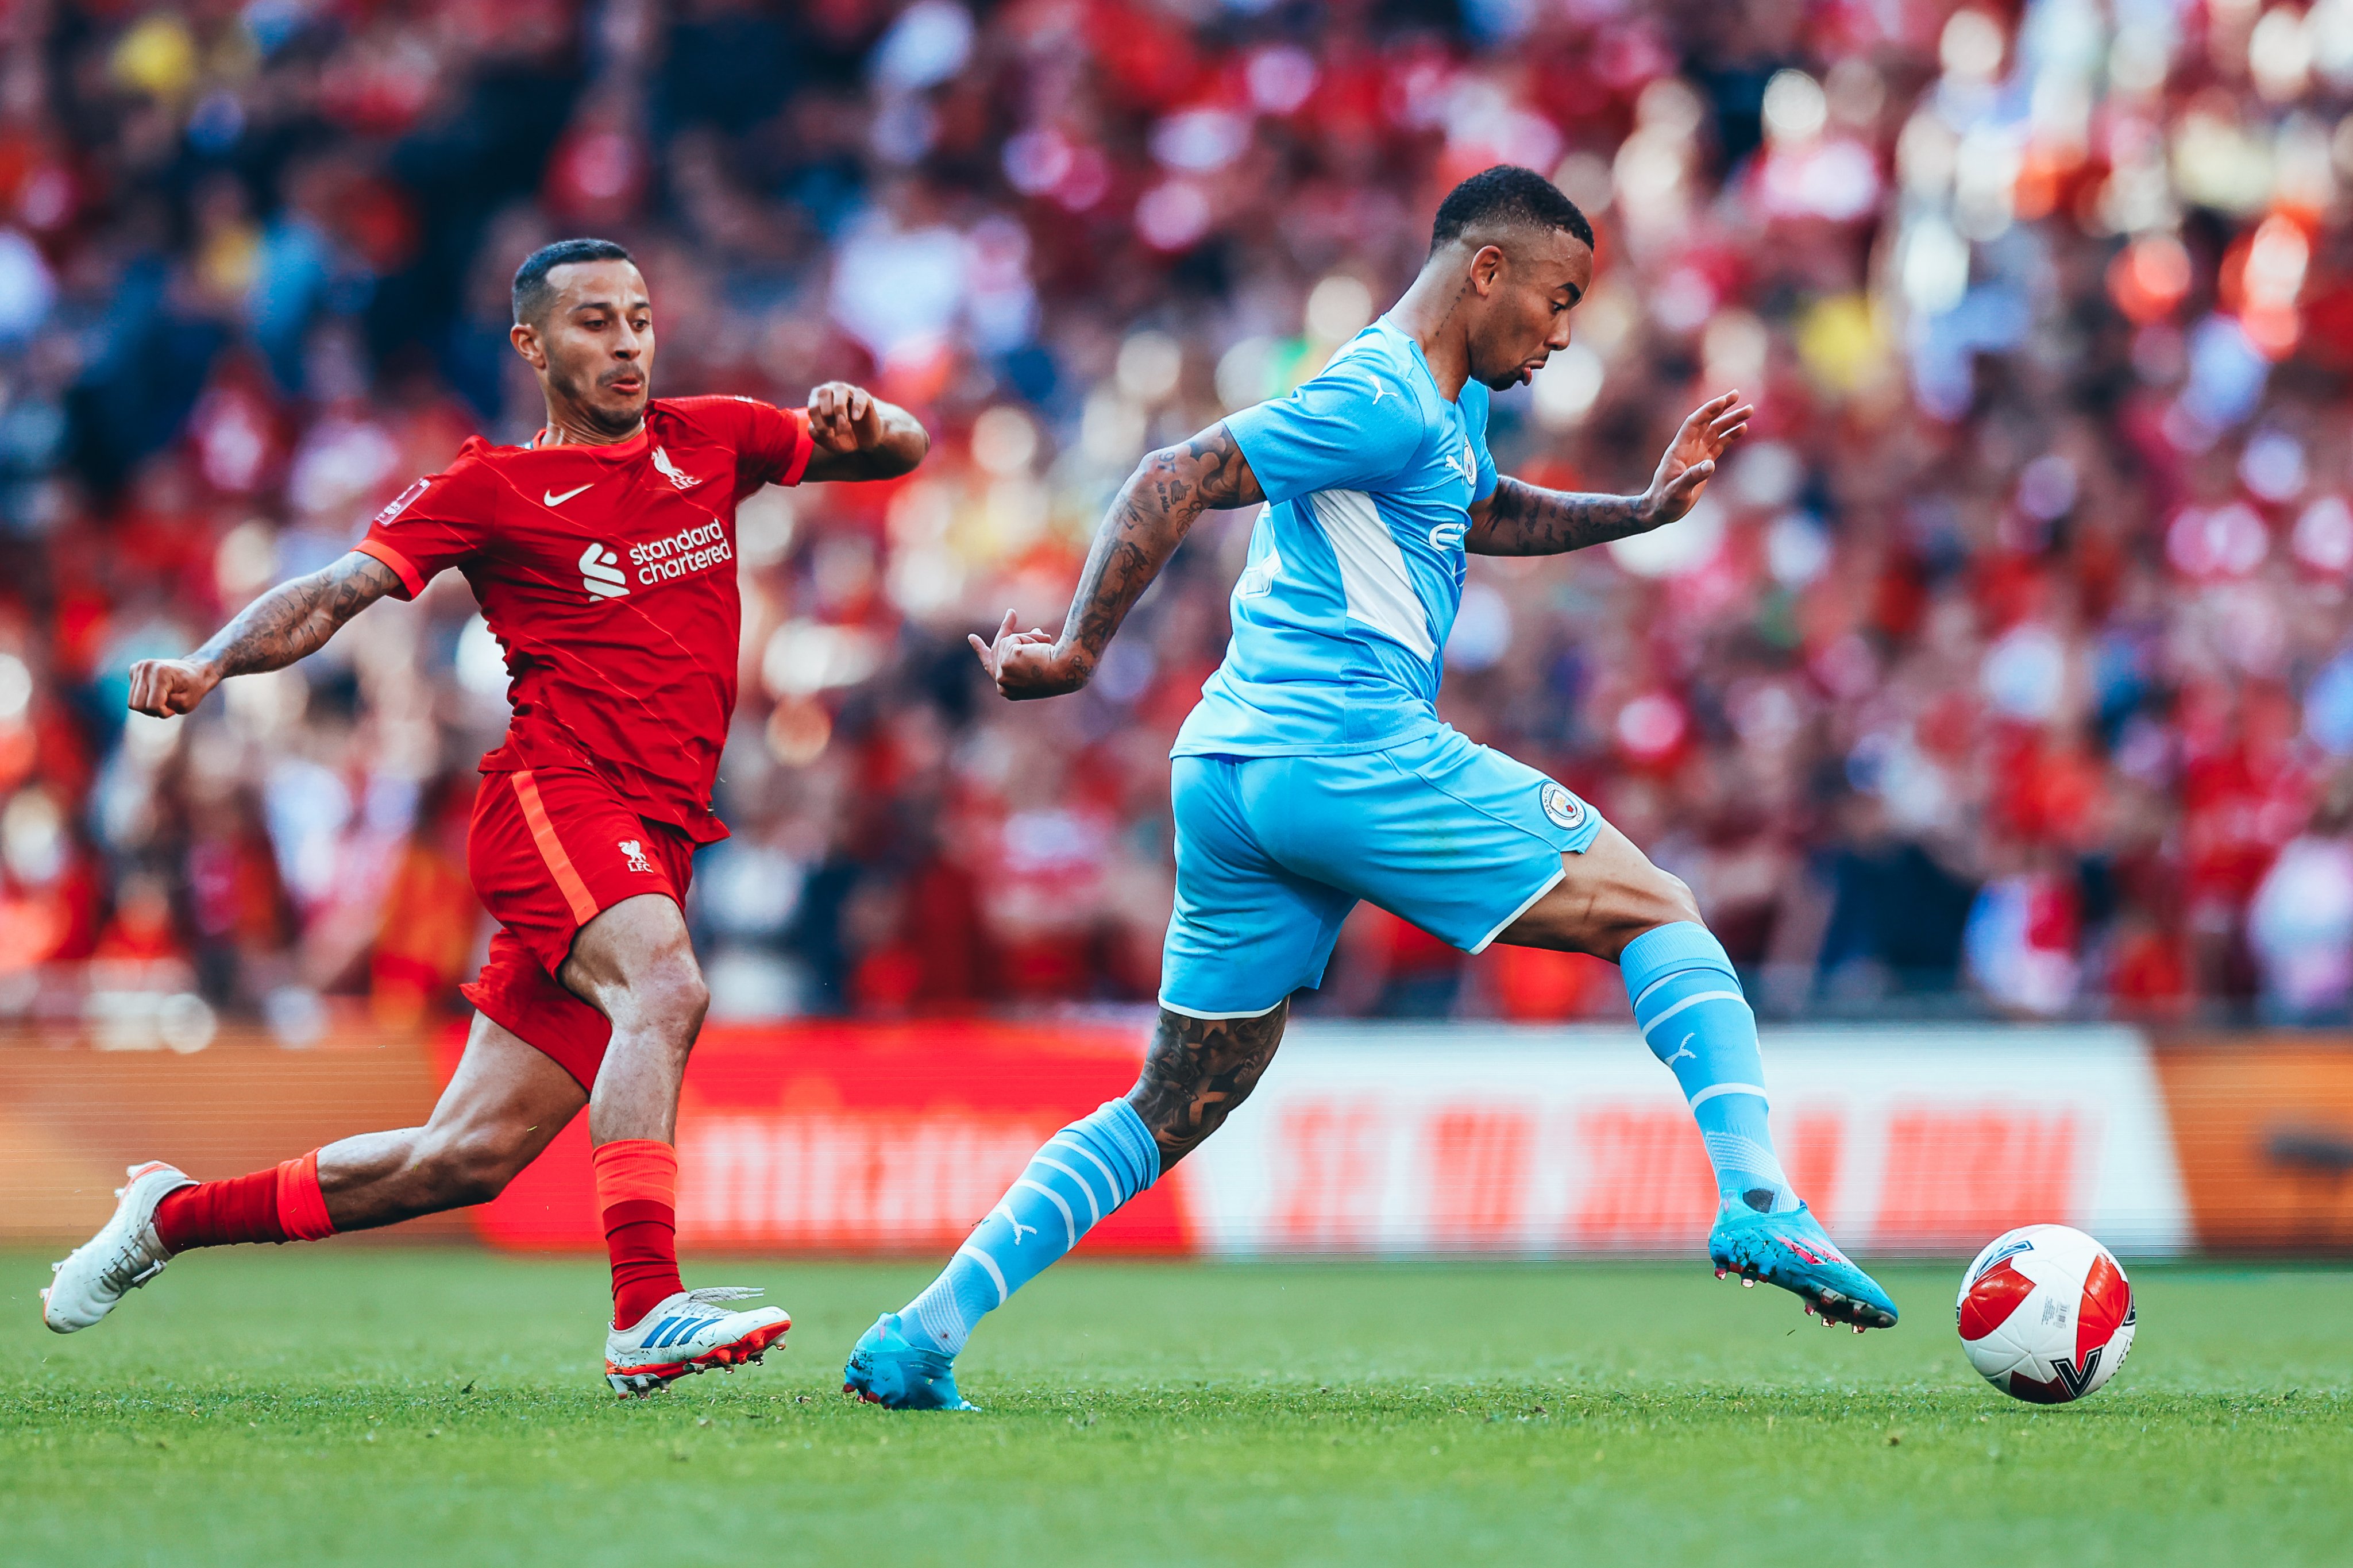 Manchester City vs Liverpool: Liverpool keep QUADRUPLE hopes alive, Man City lose 3-2 to LIVERPOOL: Chelsea/Crystal Palace to face Liverpool in FA Cup FINAL: Check HIGHLIGHTS